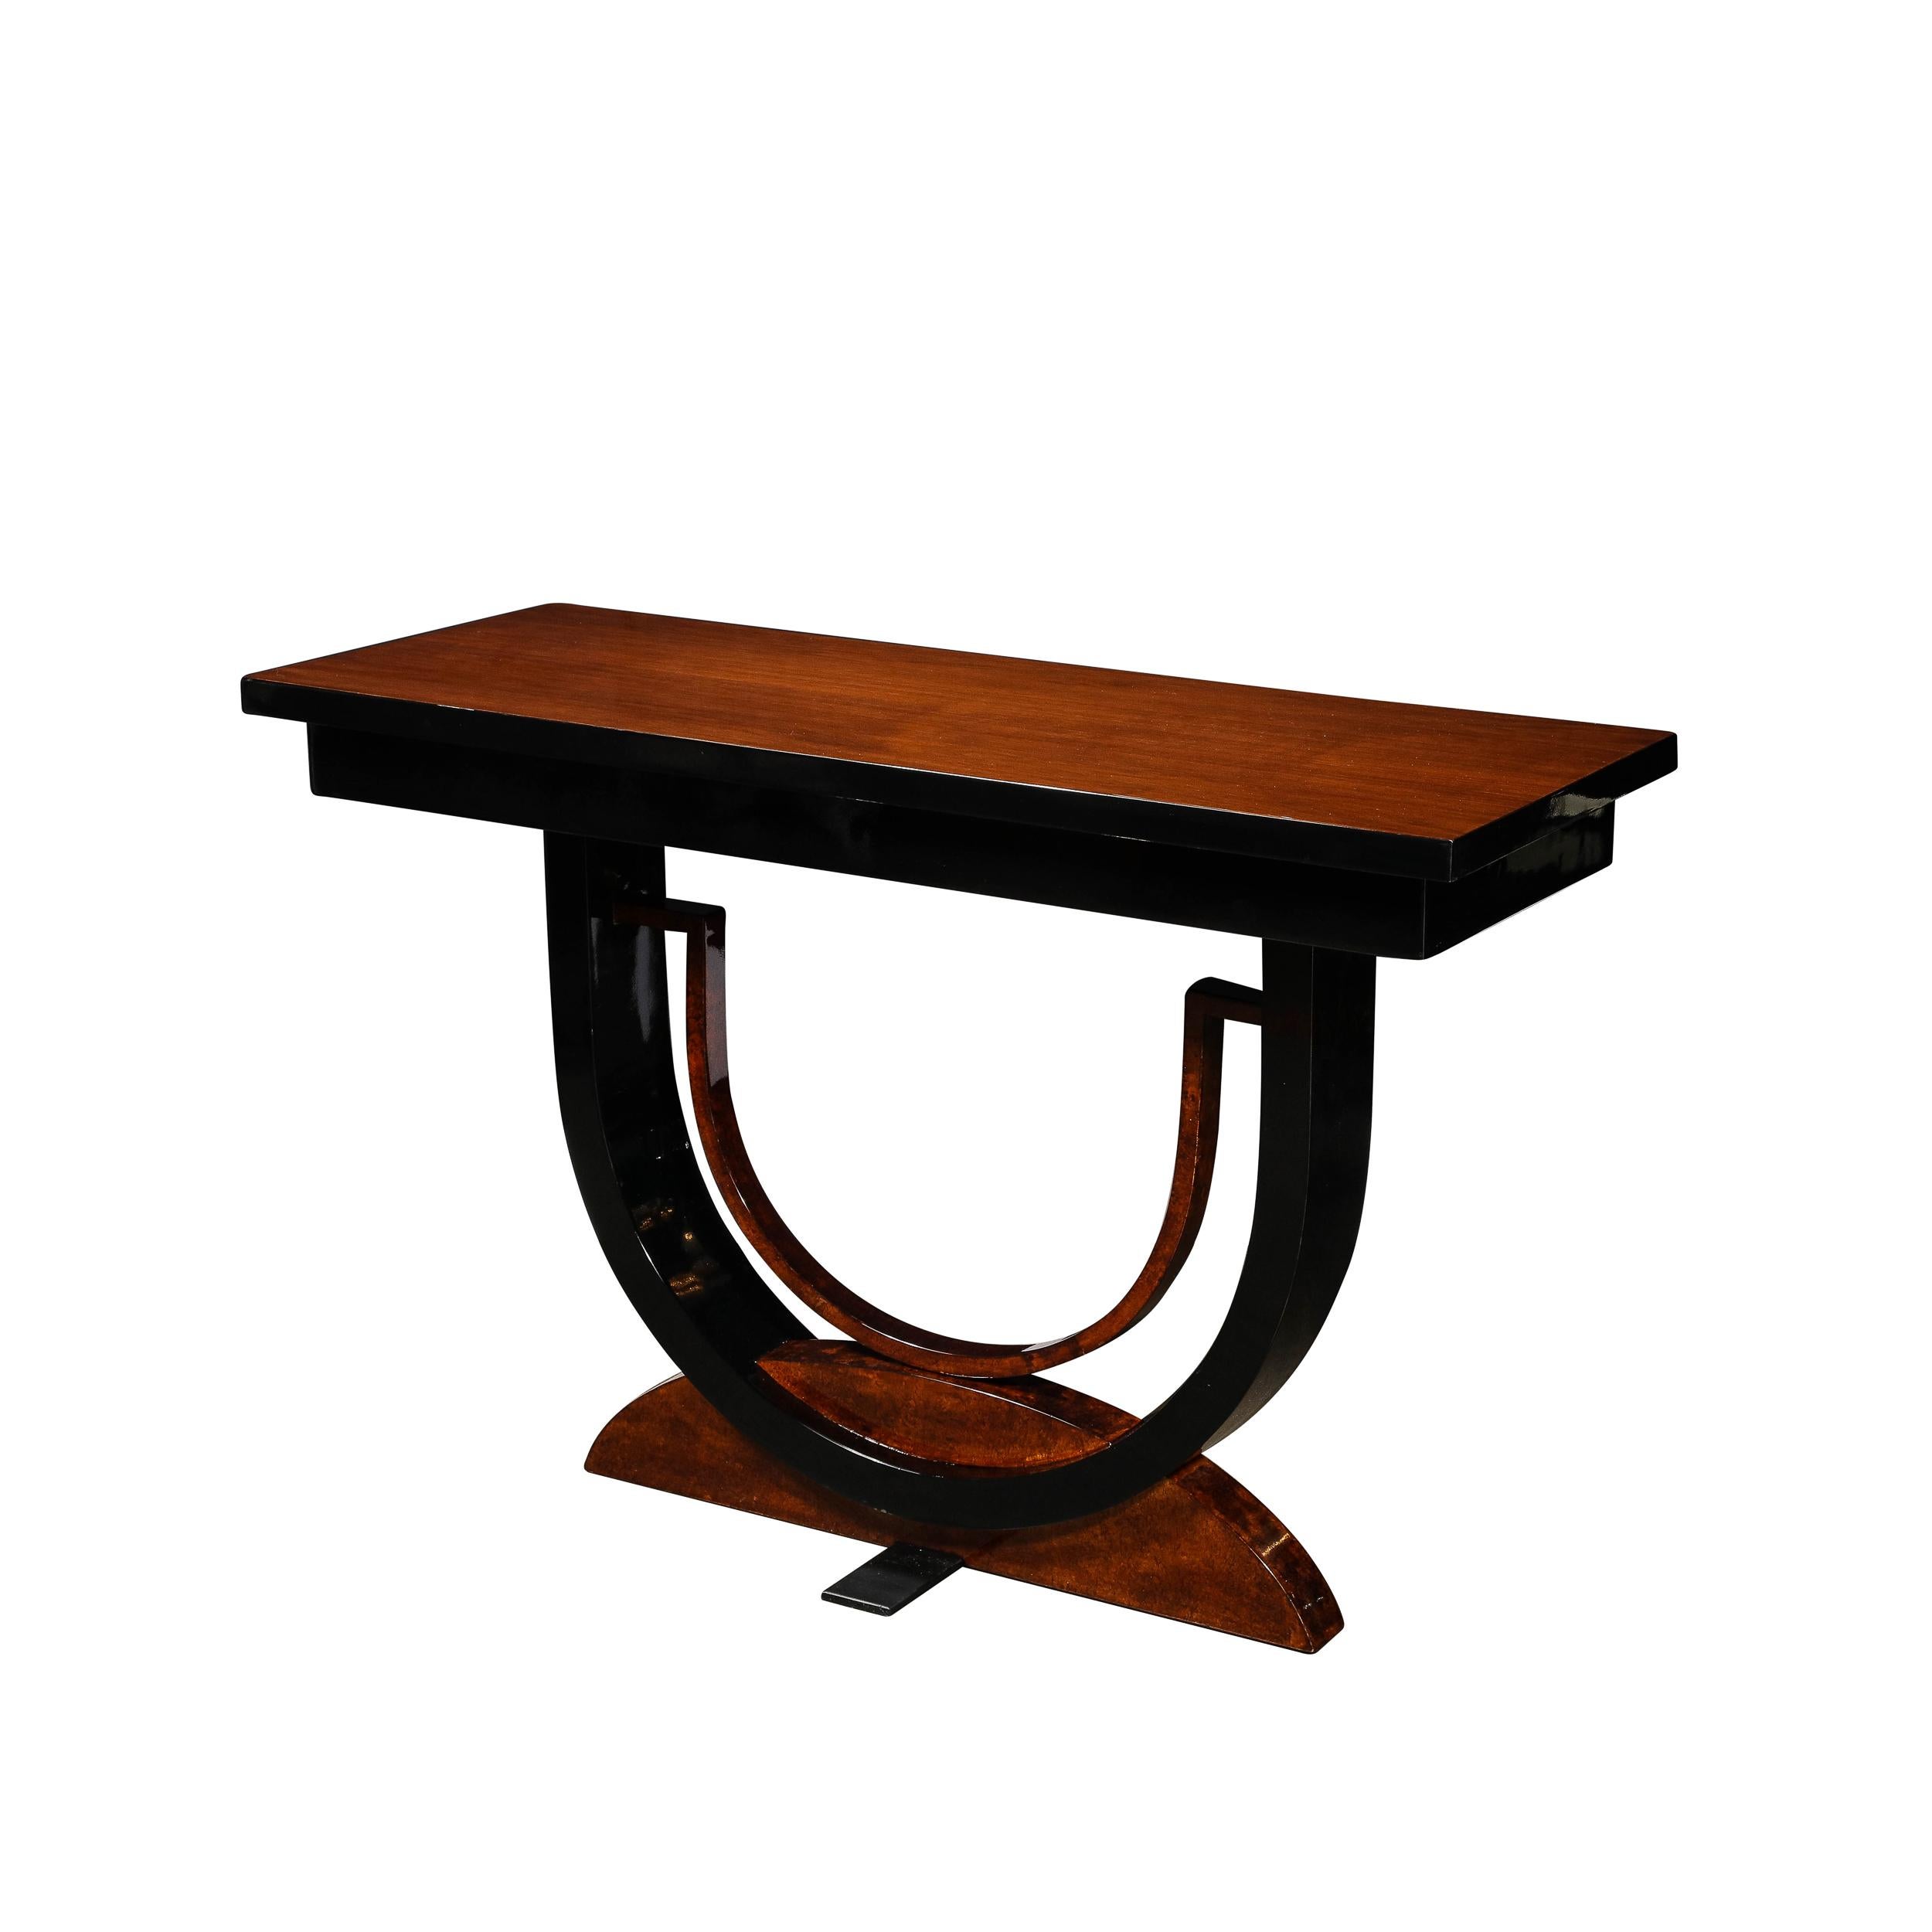 This Streamline Machine Age Art Deco Console Table is a stunning and sophisticated piece, powerfully utilizing the motifs of the Art Deco era in a stimulating and effortless geometric balance. Rendered in Bookmatched and Burled walnut with Black